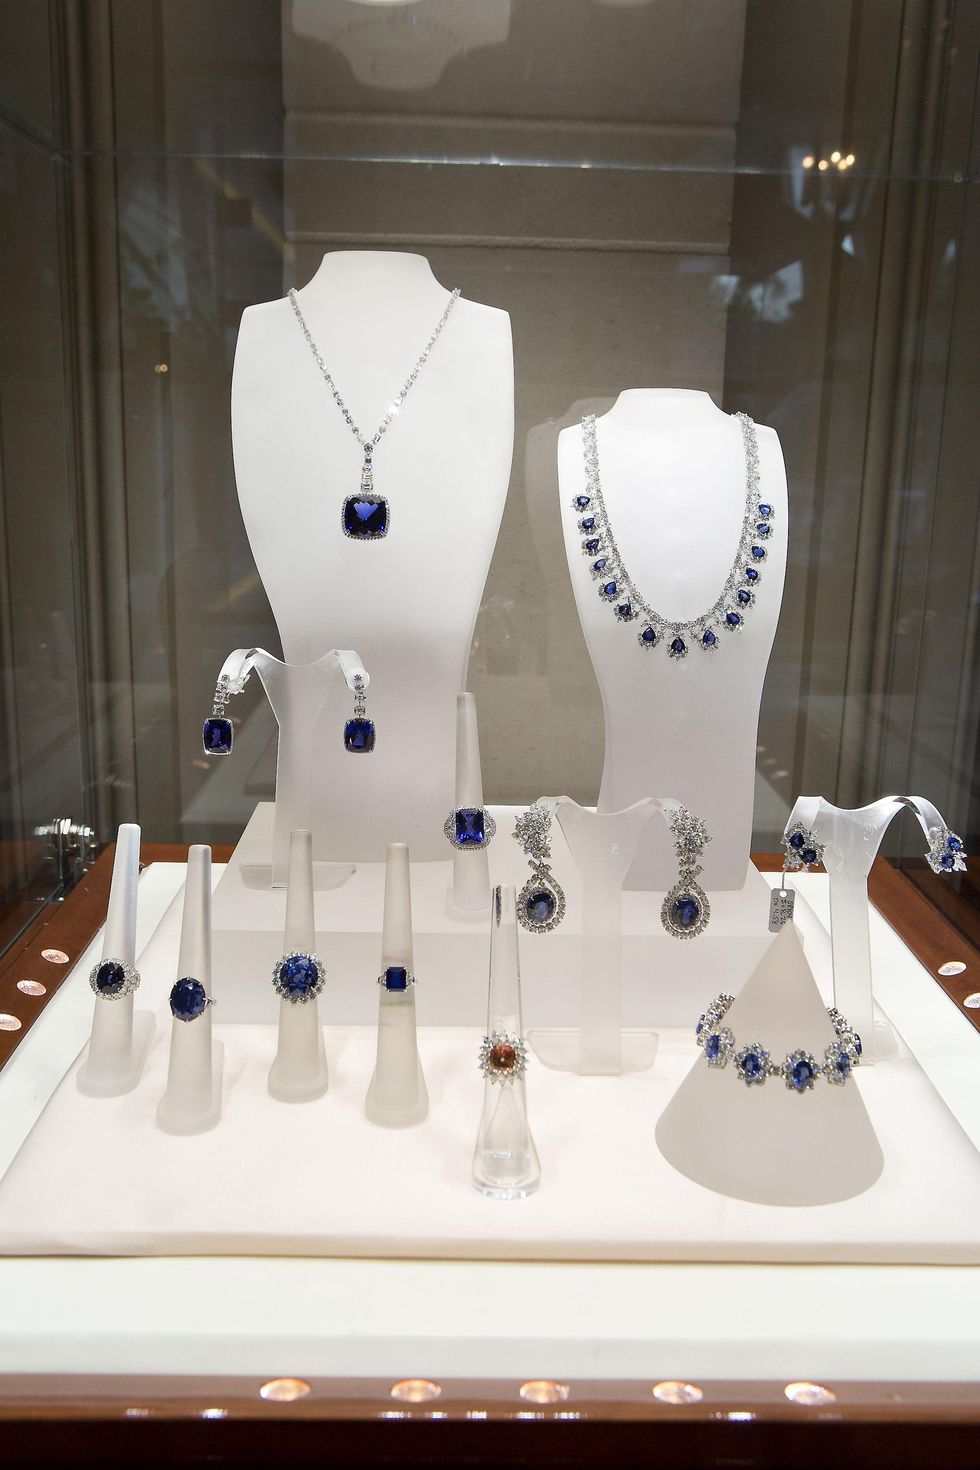 $500 million in jewels on display at a River Oaks mansion, putting ...